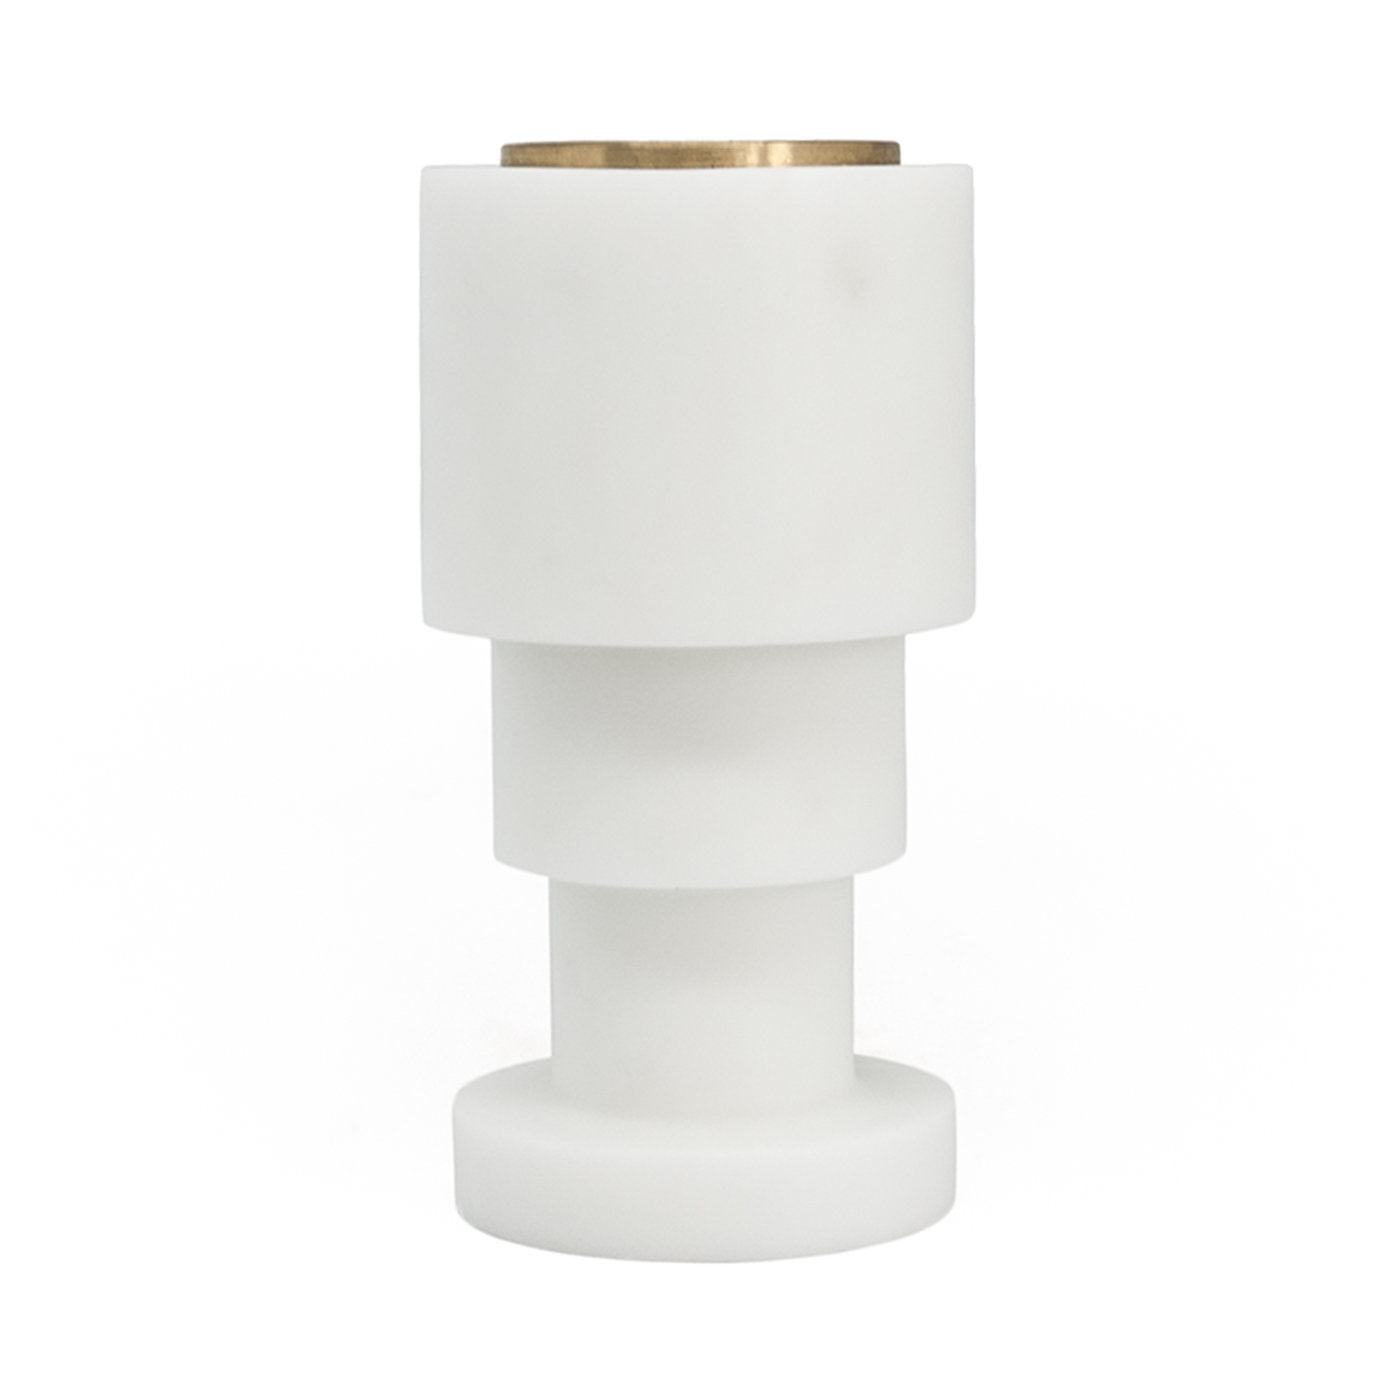 Carrara Marble and Brass Candleholder by Jacopo Simonetti - Alternative view 2